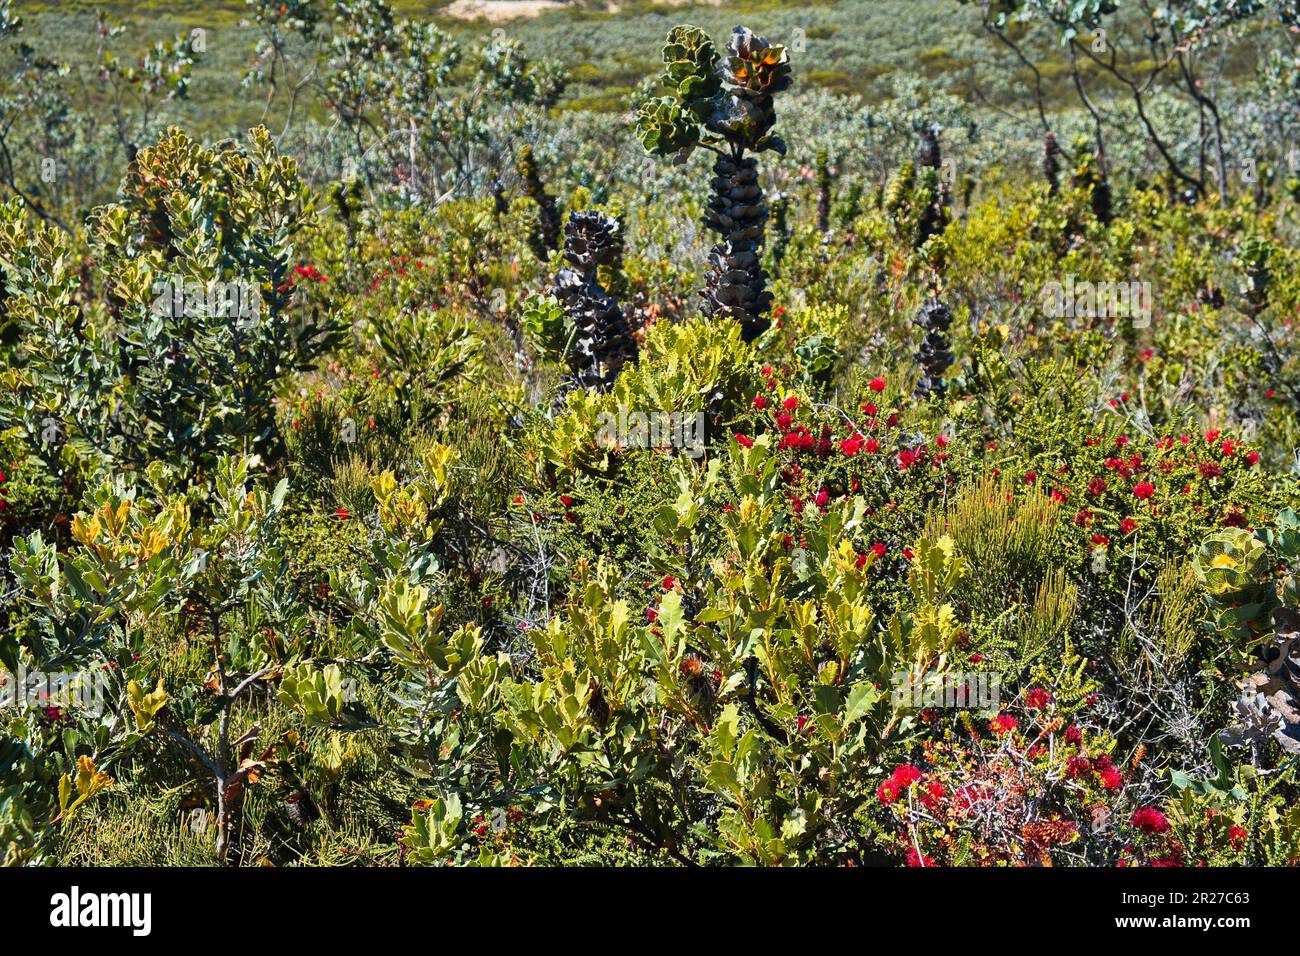 Plant community with royal hakea, Barrens regelia  and oak-leaved banksia  in Fitzgerald River National Park, Western Australia Stock Photo